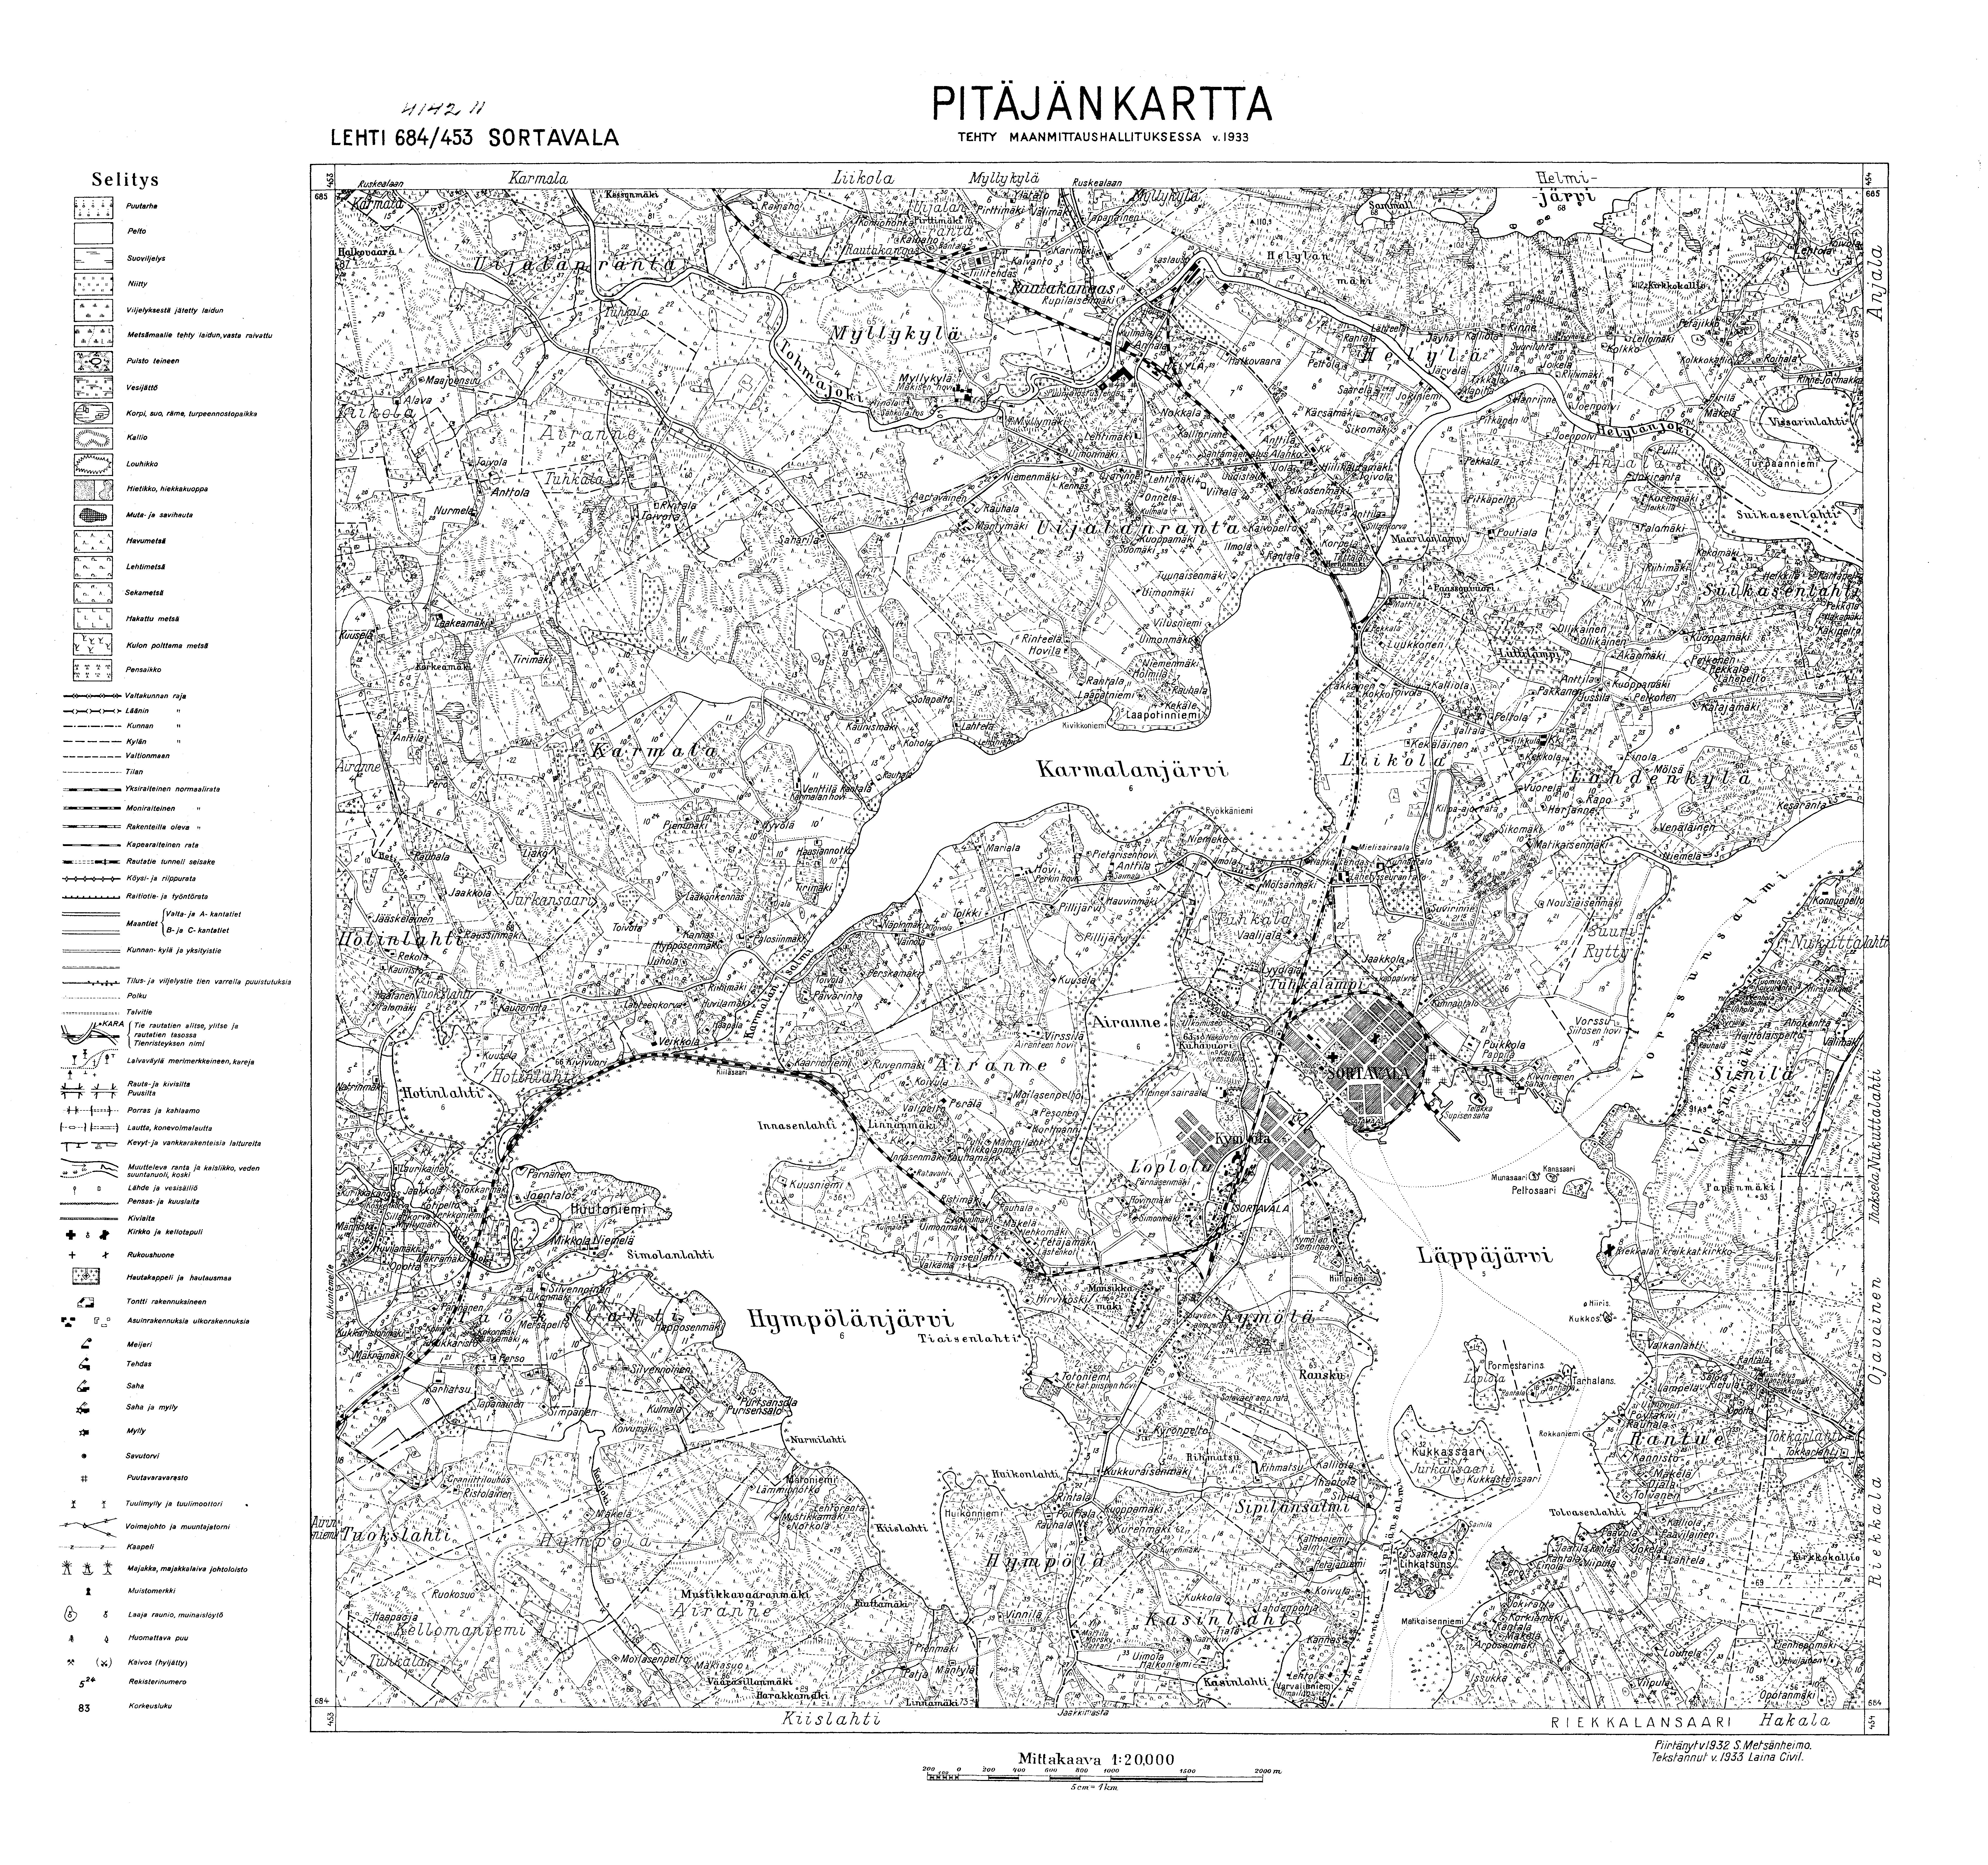 Sortavala. Pitäjänkartta 414211. Parish map from 1932. Use the zooming tool to explore in higher level of detail. Obtain as a quality print or high resolution image